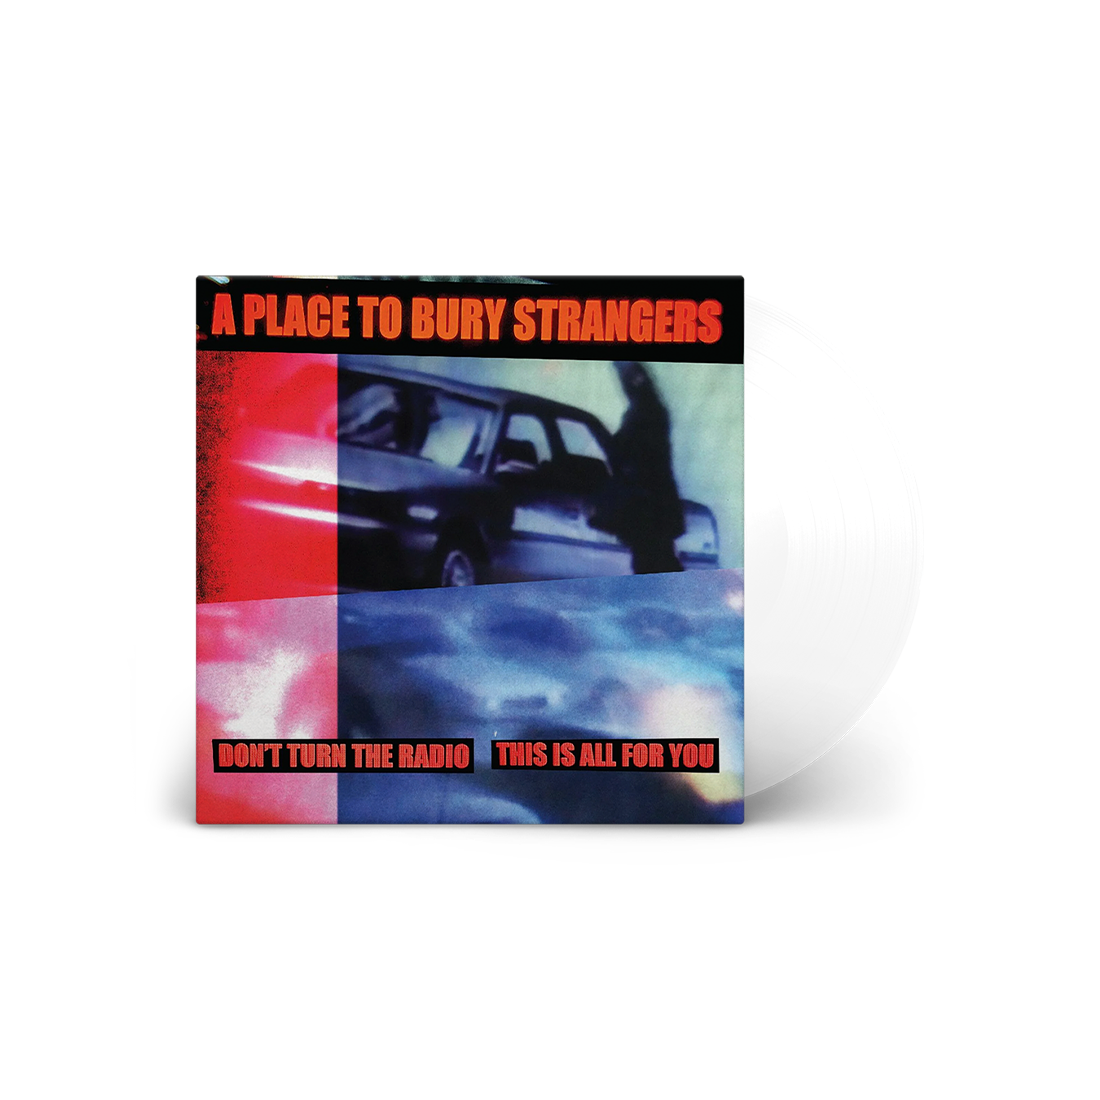 A Place To Bury Strangers - Don't Turn The Radio/This Is All For You: White Vinyl LP